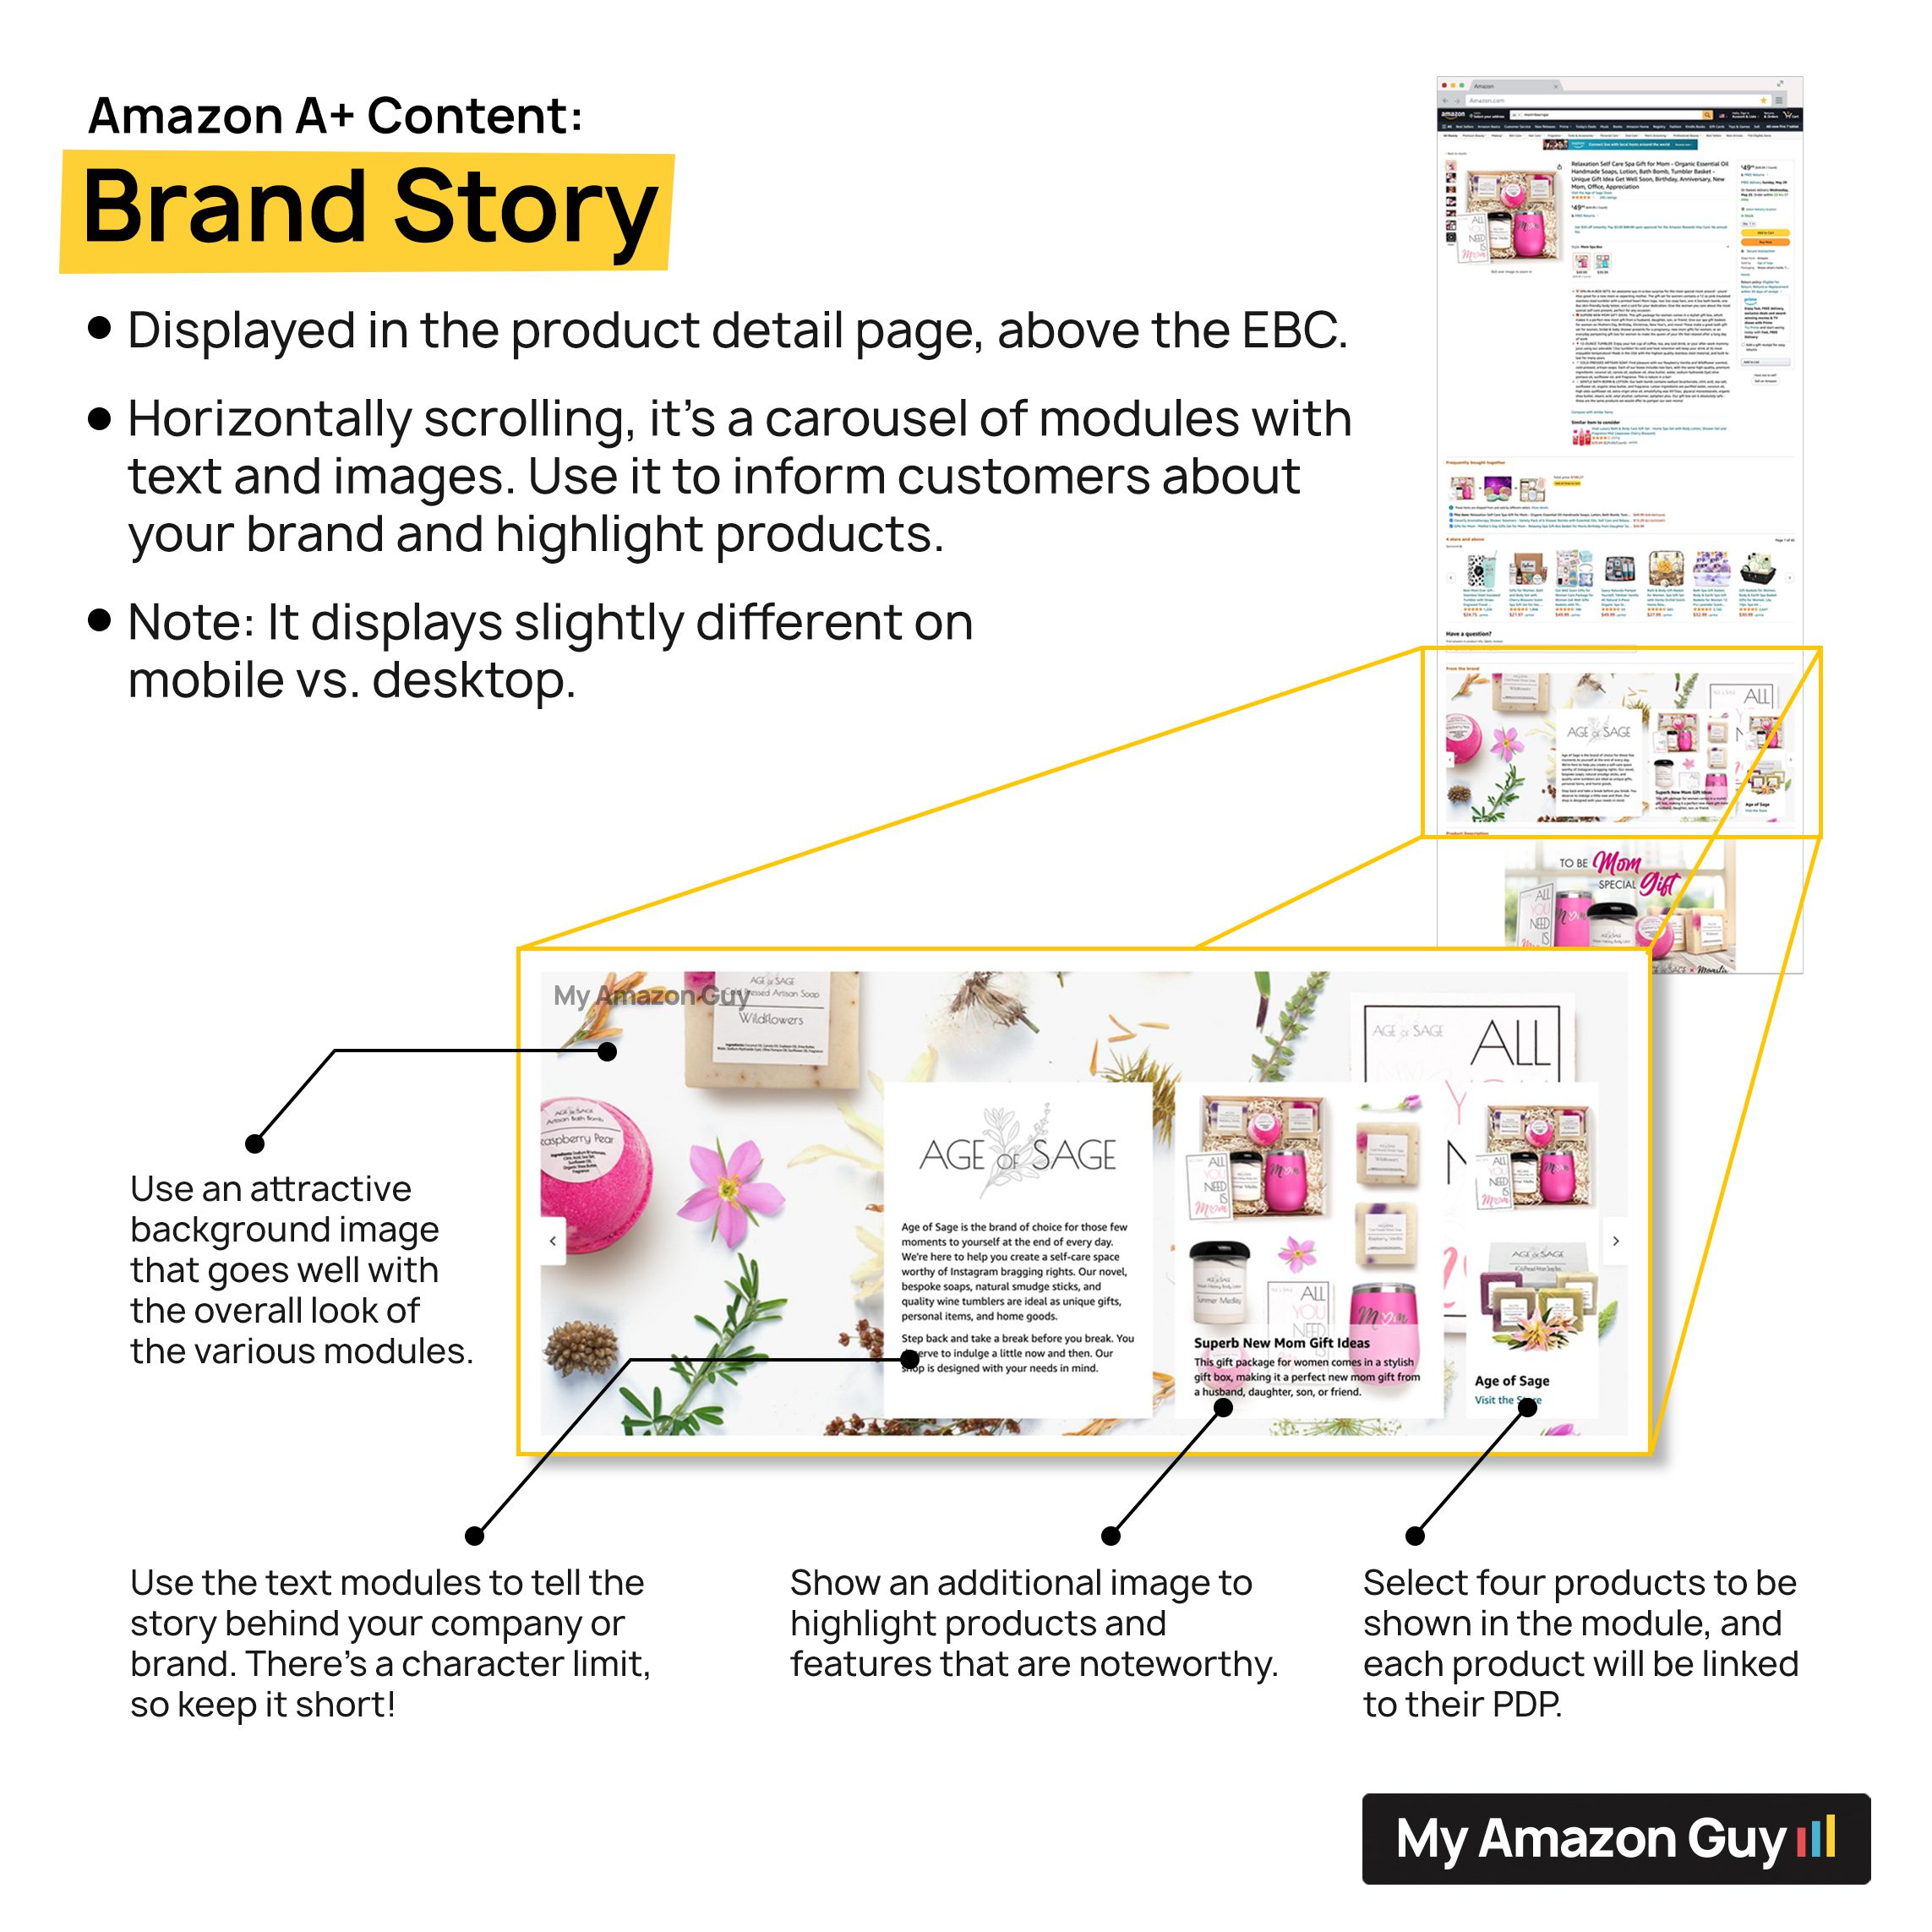 Amazon A+ Content Brand Story